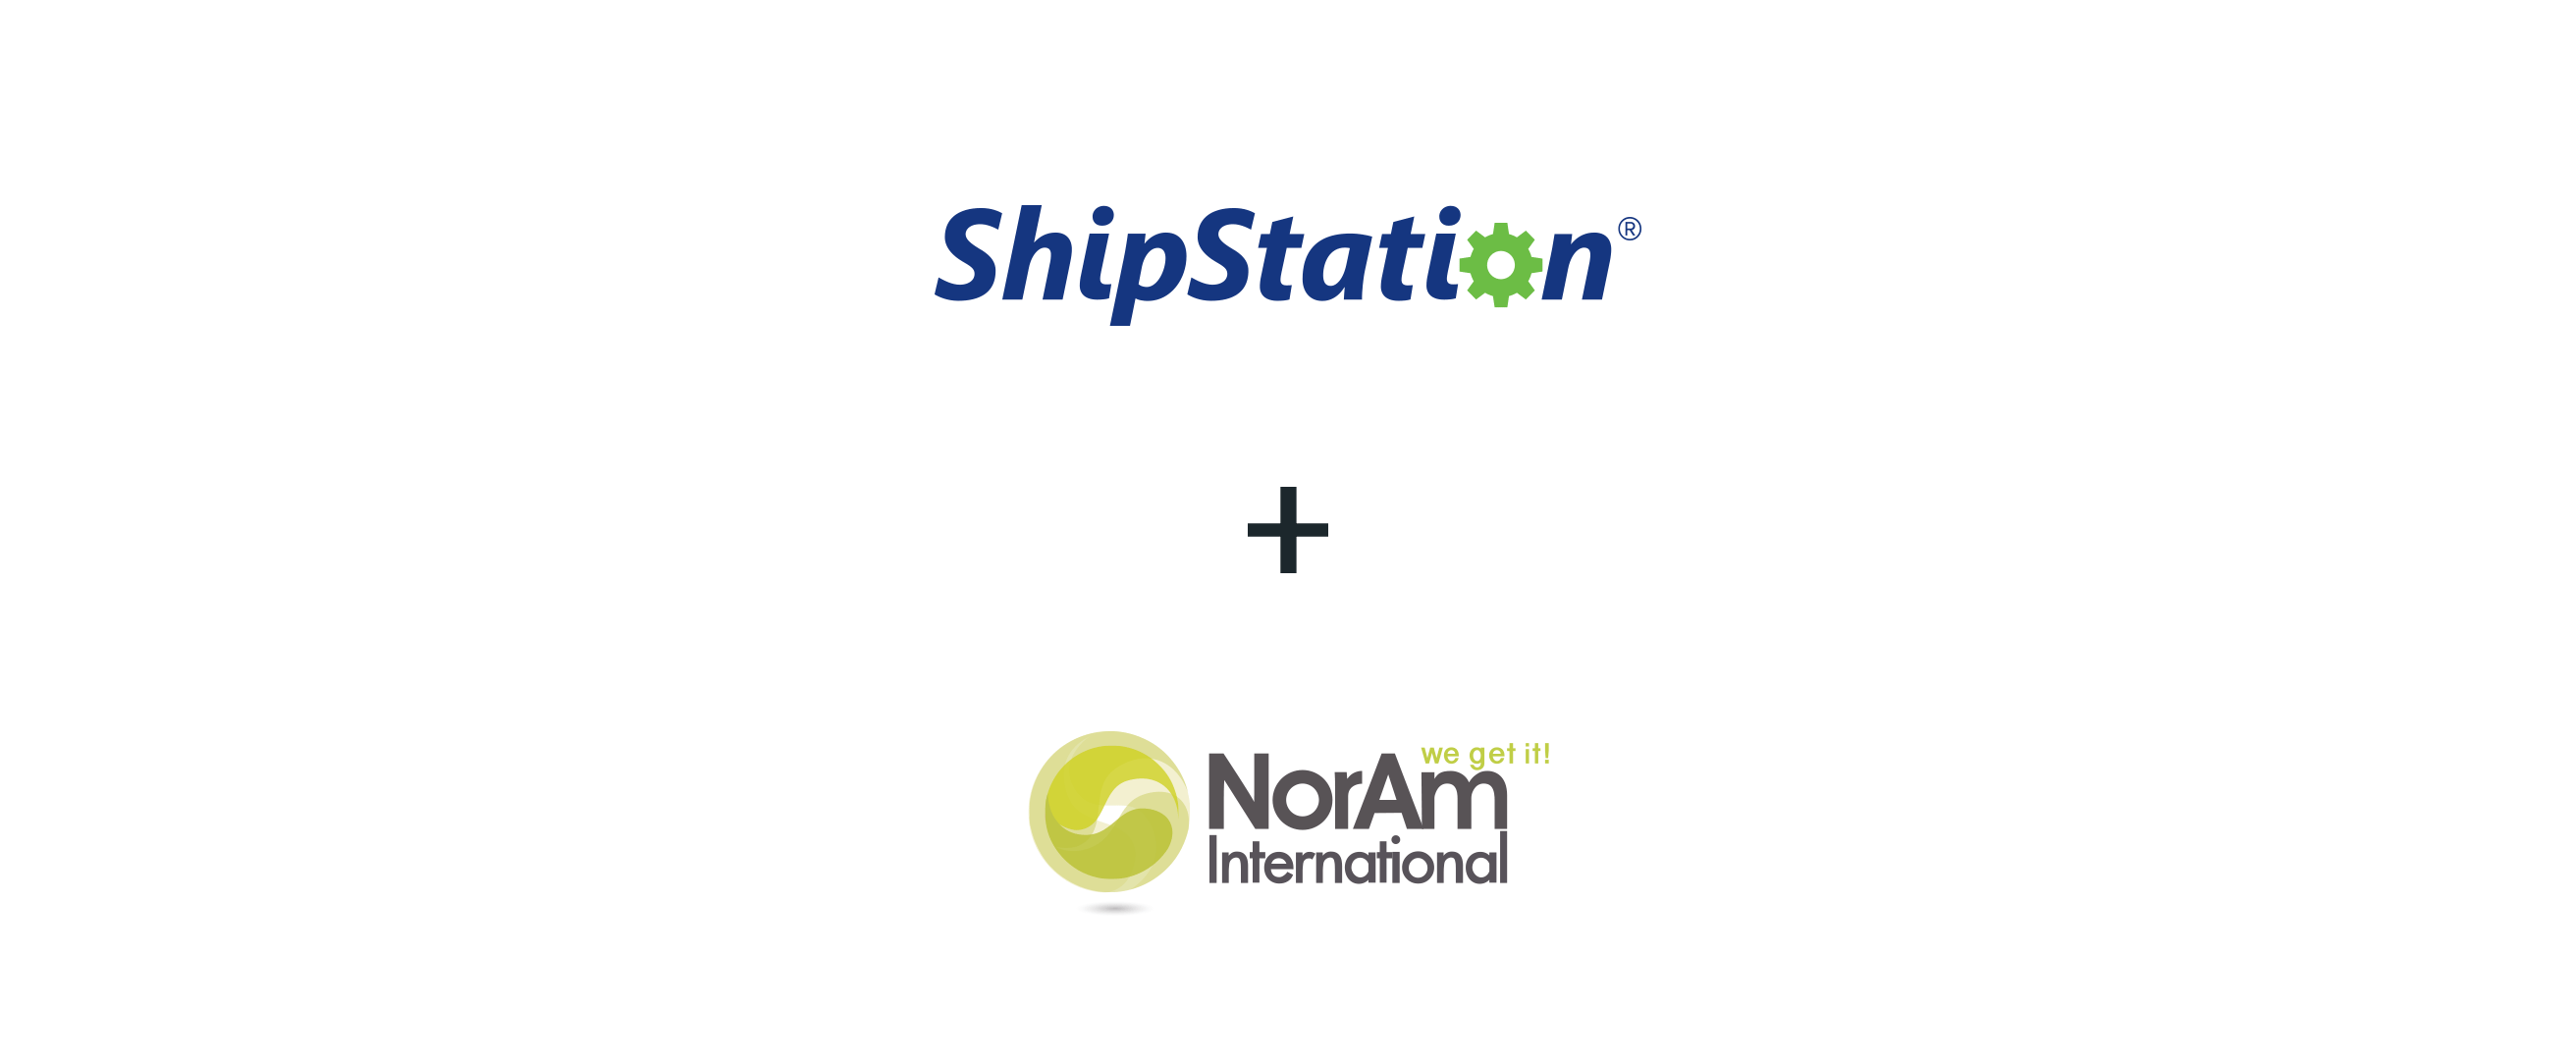 NorAm and ShipStation